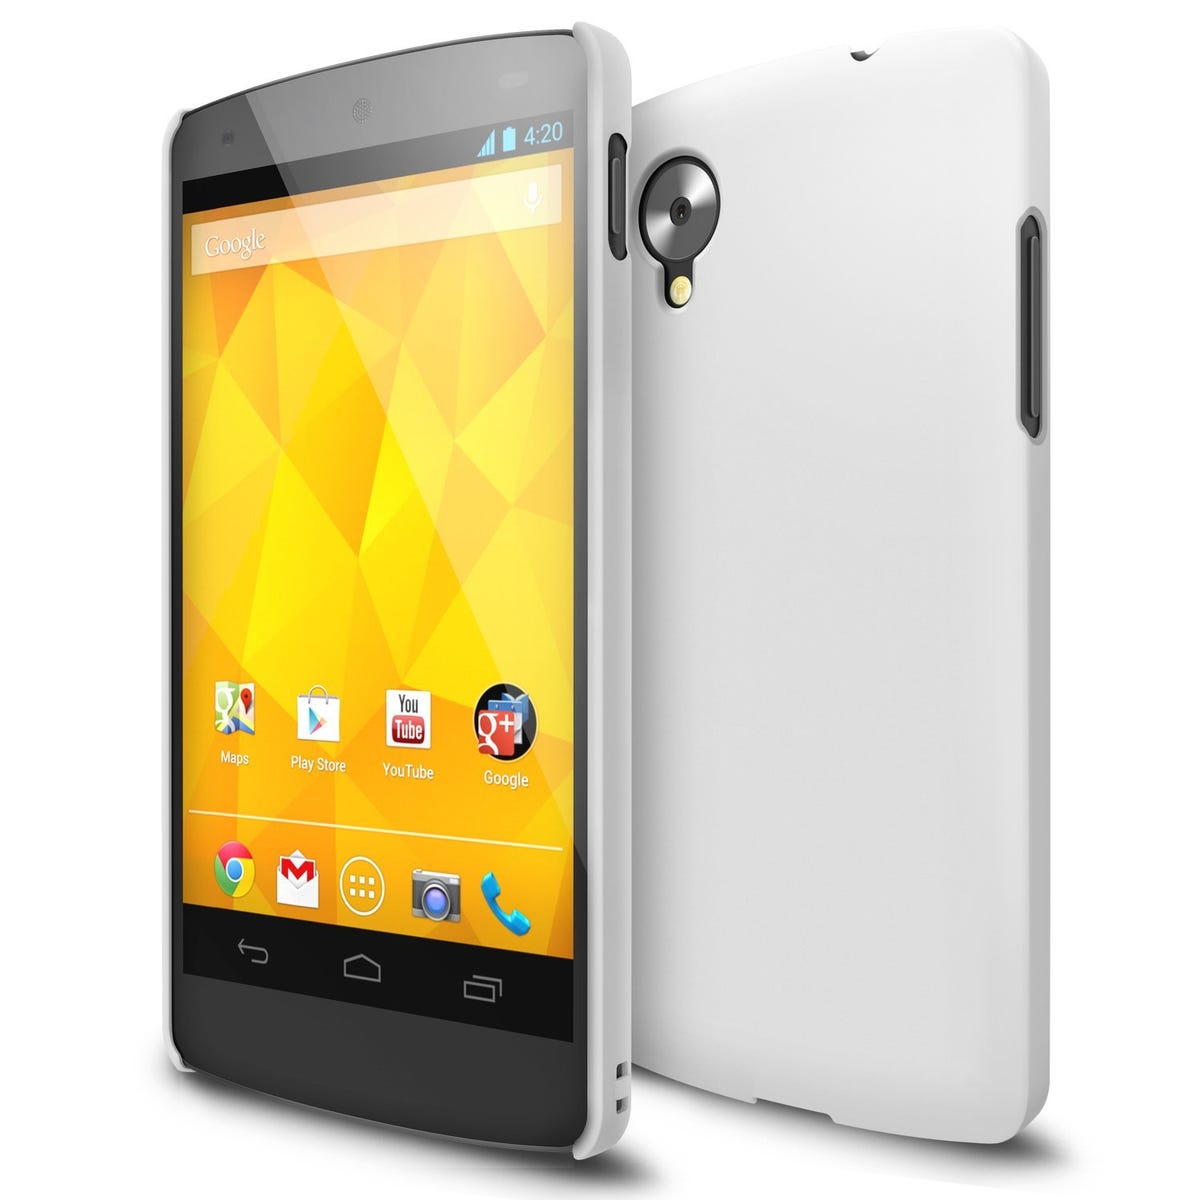 A white Ringke Slim case for the Google Nexus 5 phone, on sale at Amazon.